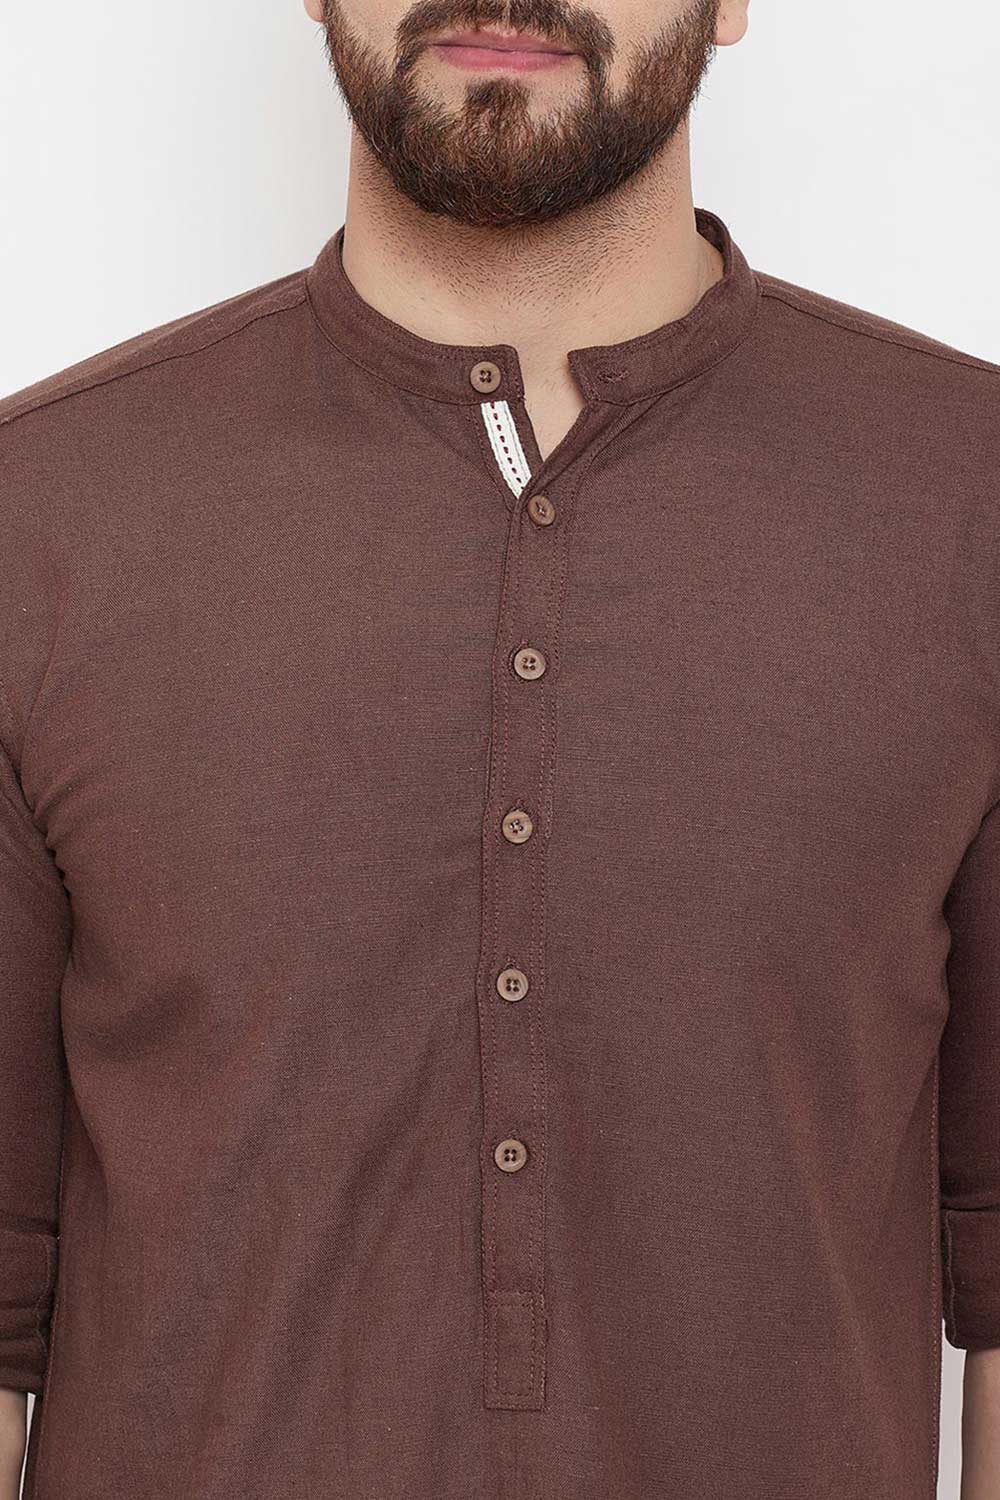 Buy Blended Cotton Solid Kurta in Dark Brown Online - Zoom Out